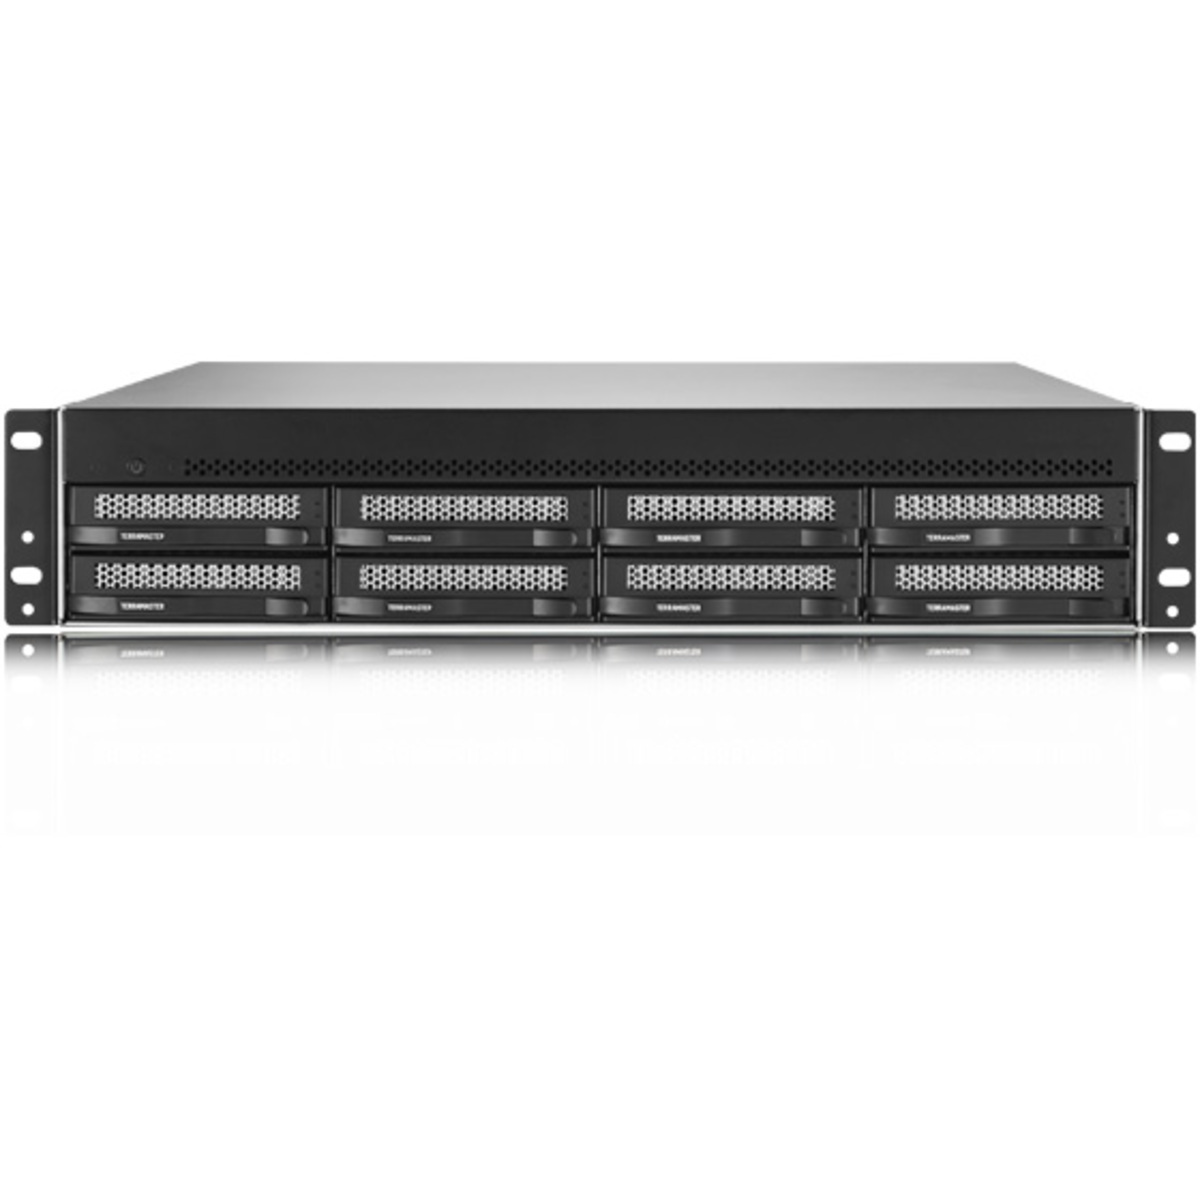 TerraMaster U8-450 80tb 8-Bay RackMount Multimedia / Power User / Business NAS - Network Attached Storage Device 4x20tb Seagate IronWolf Pro ST20000NT001 3.5 7200rpm SATA 6Gb/s HDD NAS Class Drives Installed - Burn-In Tested U8-450